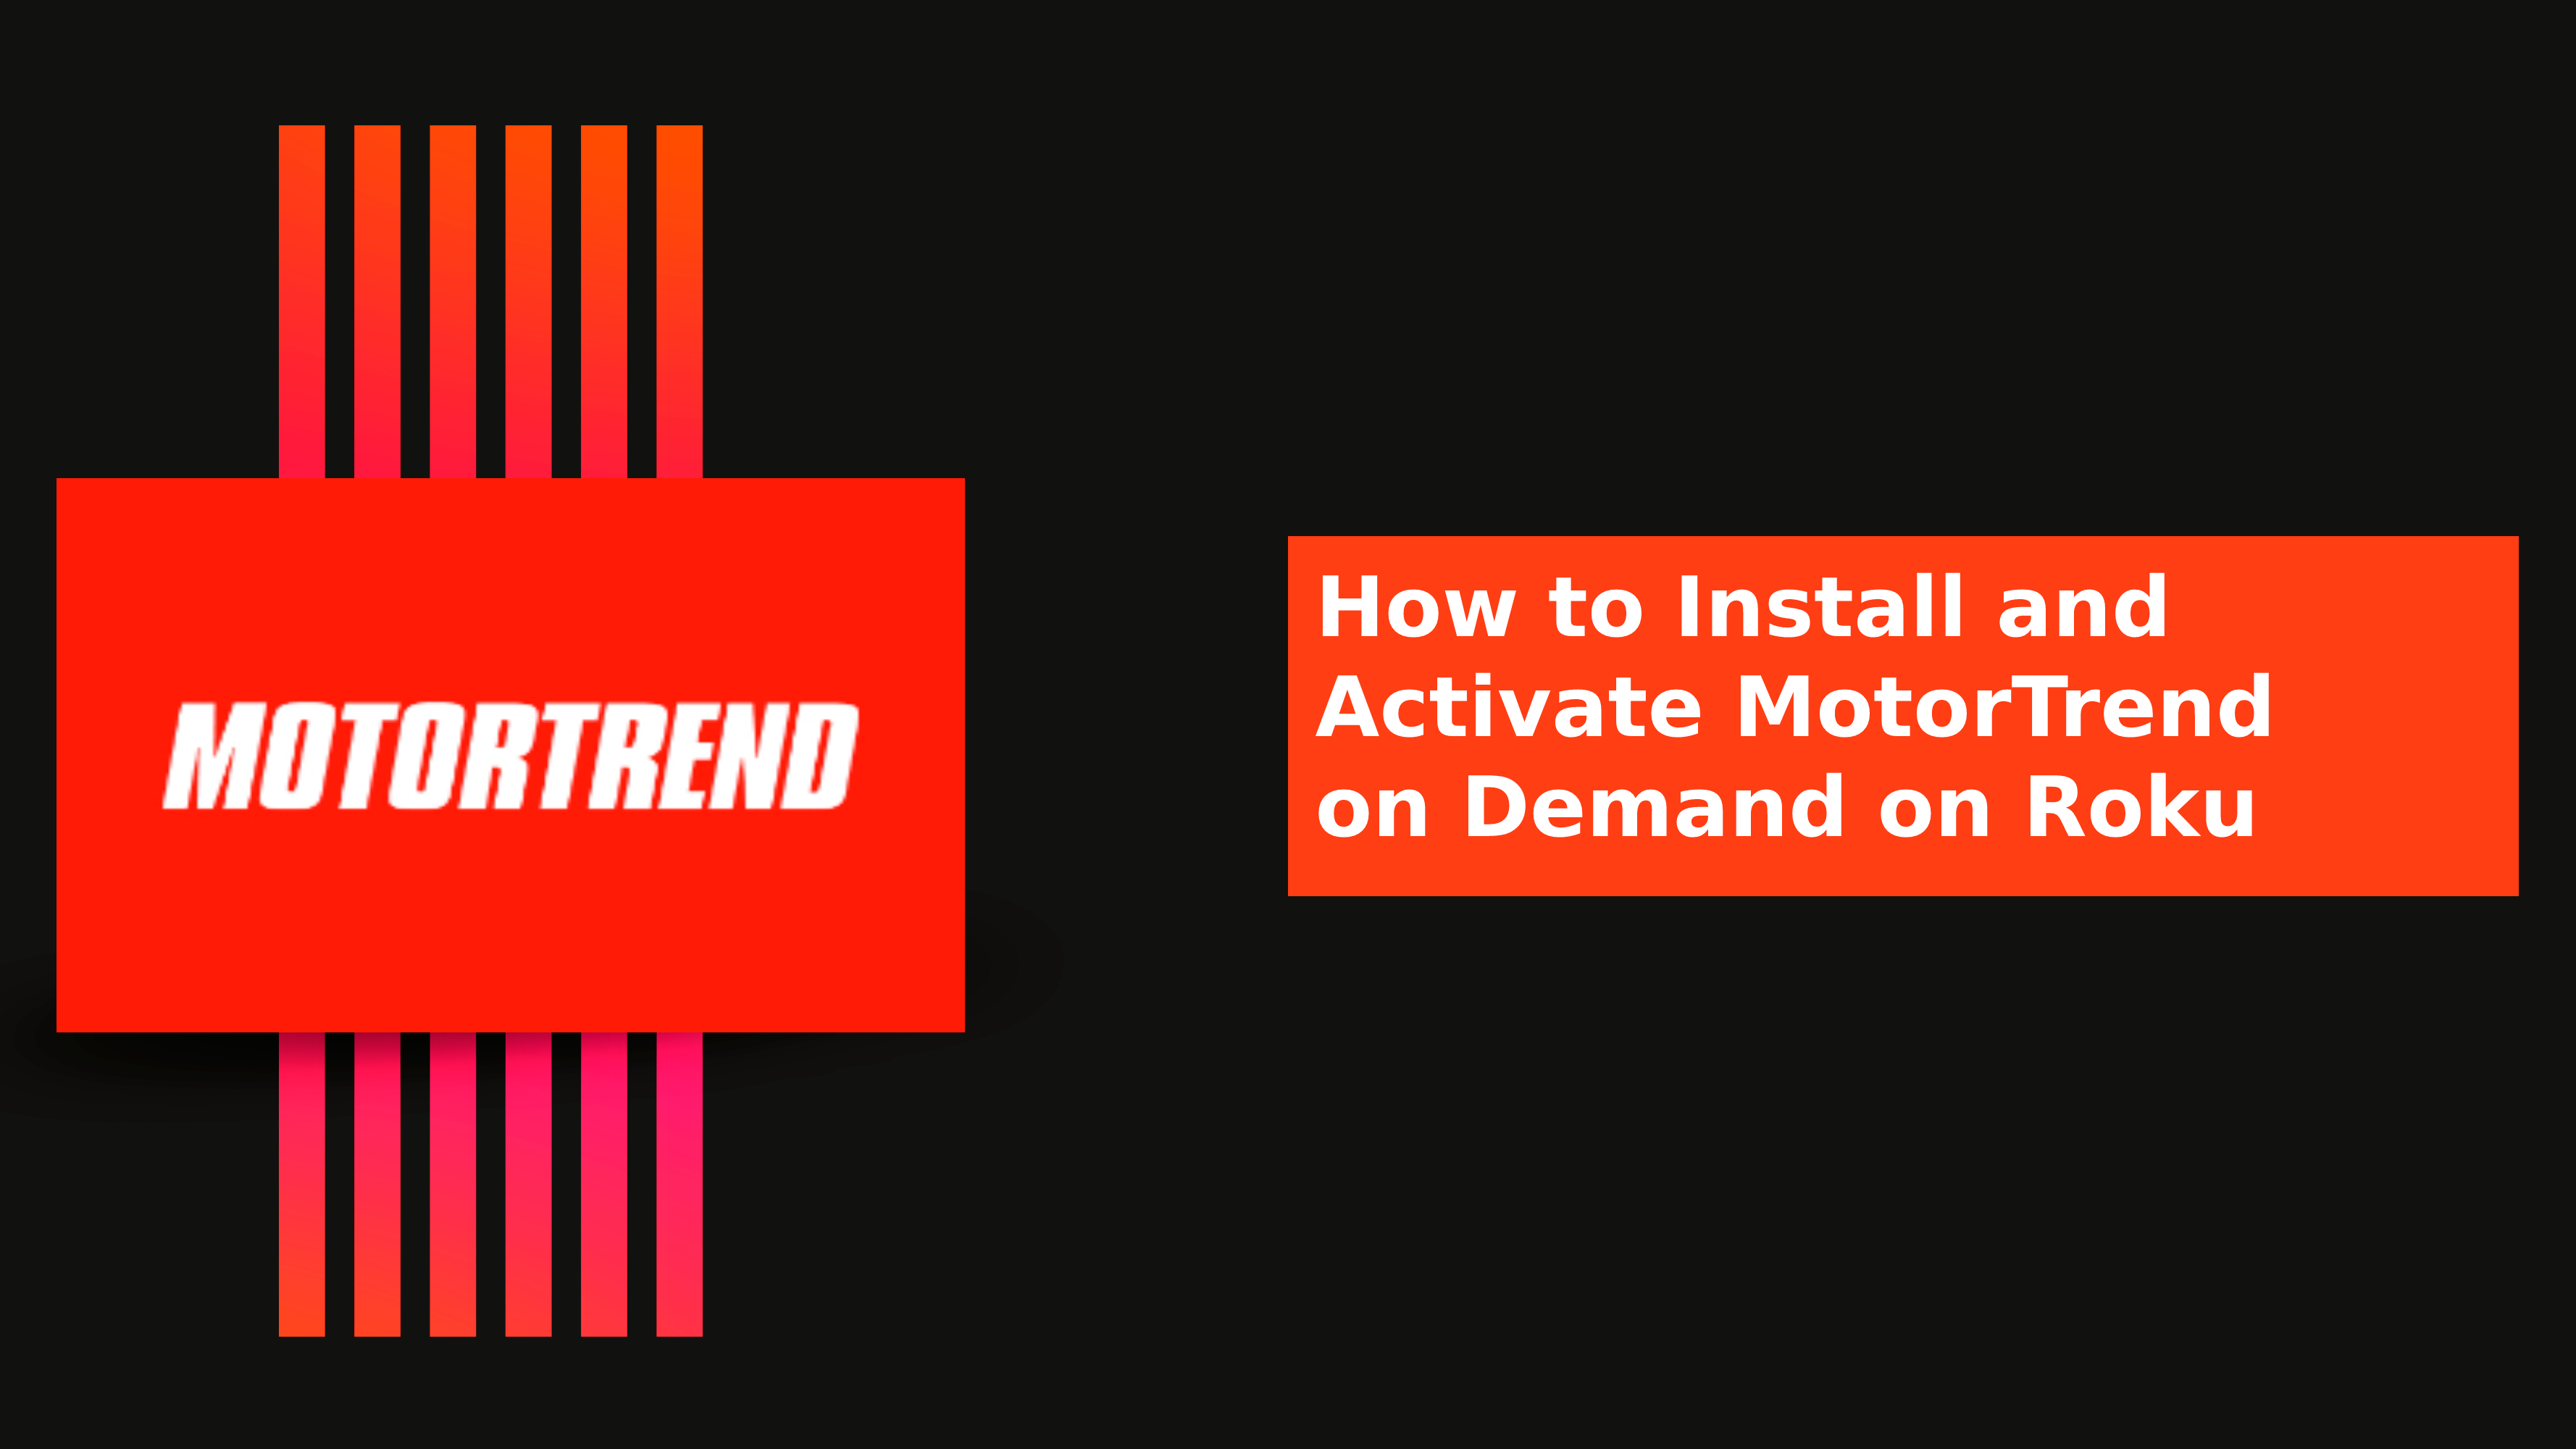 How to Install and Activate MotorTrend on Demand on Roku